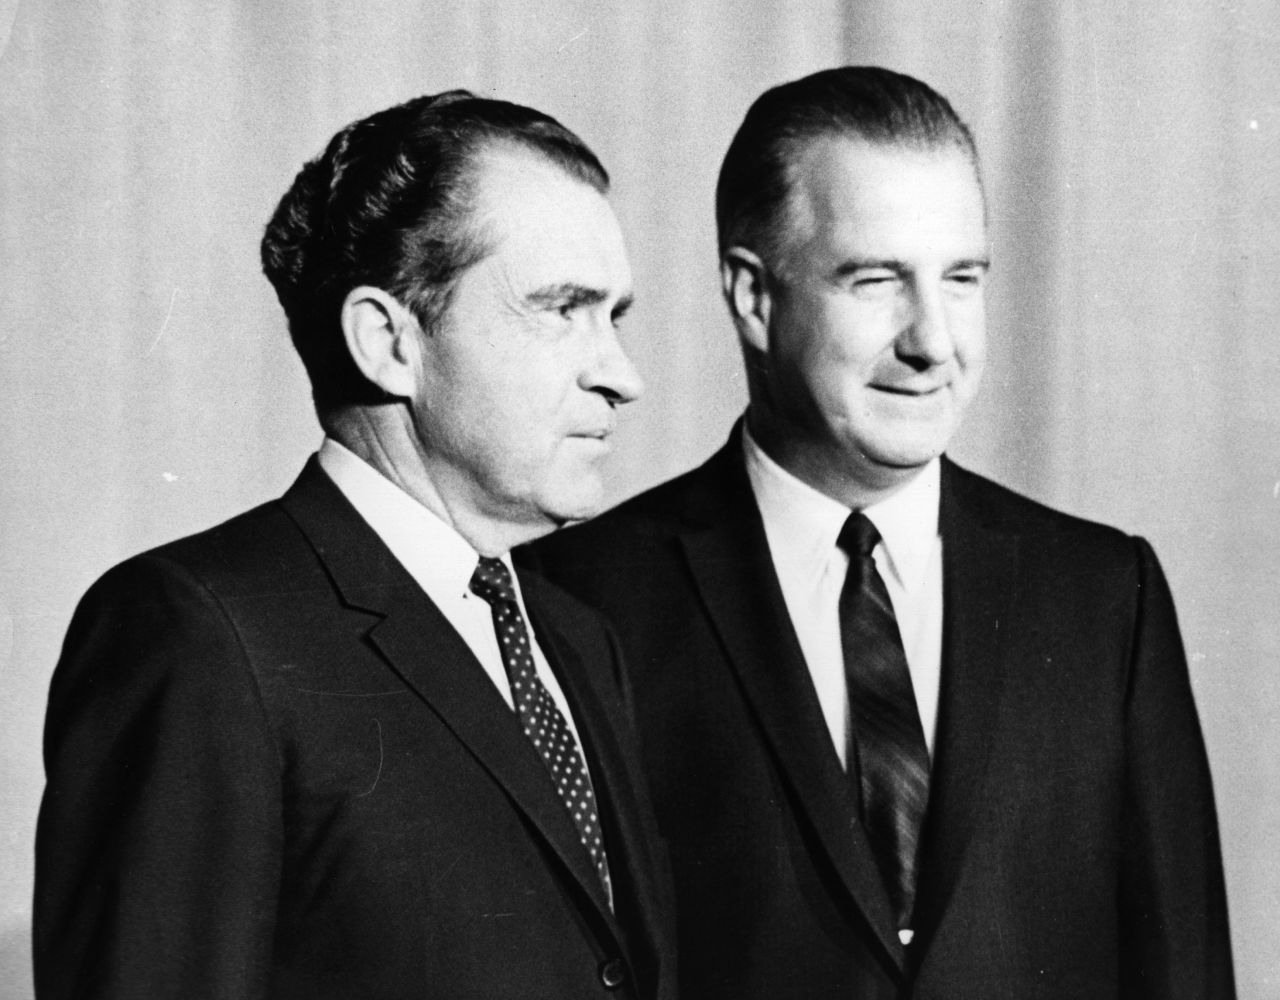 Spiro T. Agnew, who served as vice president under President Richard Nixon, resigned his position after being indicted for bribery charges, becoming the first U.S. vice president in history to resign under criminal charges.